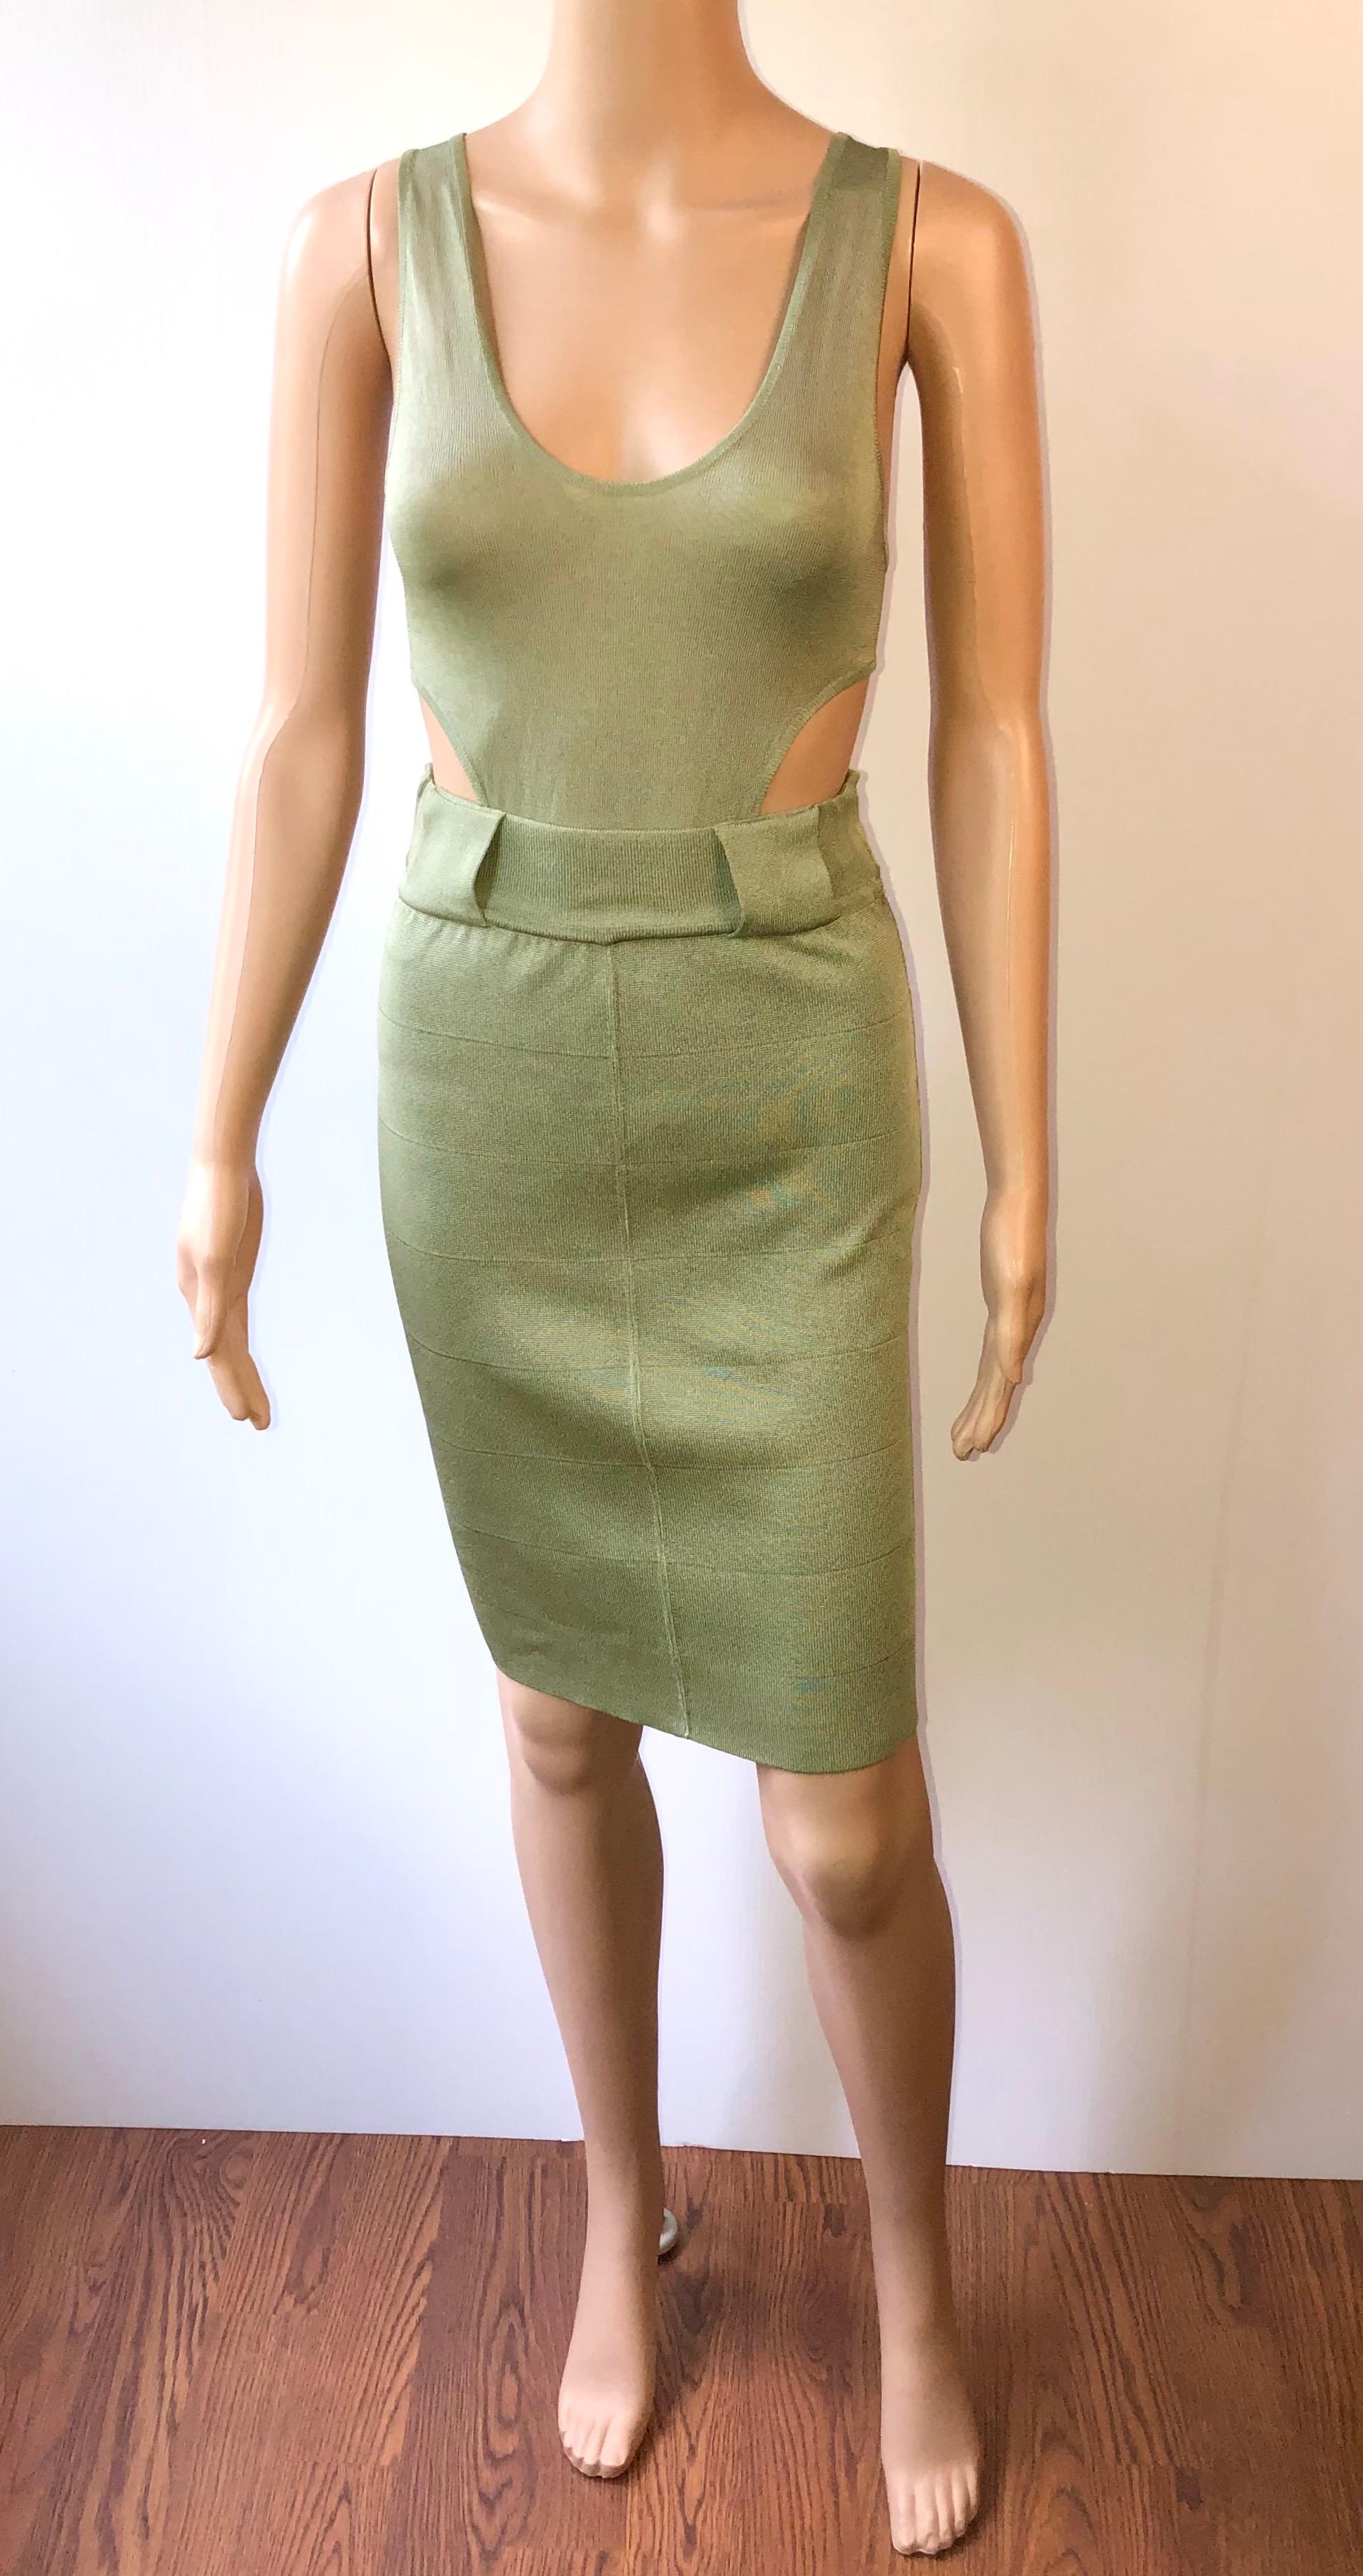 Beige Azzedine Alaia S/S 1985 Vintage Plunged Cutout Bodycon Green Dress For Sale